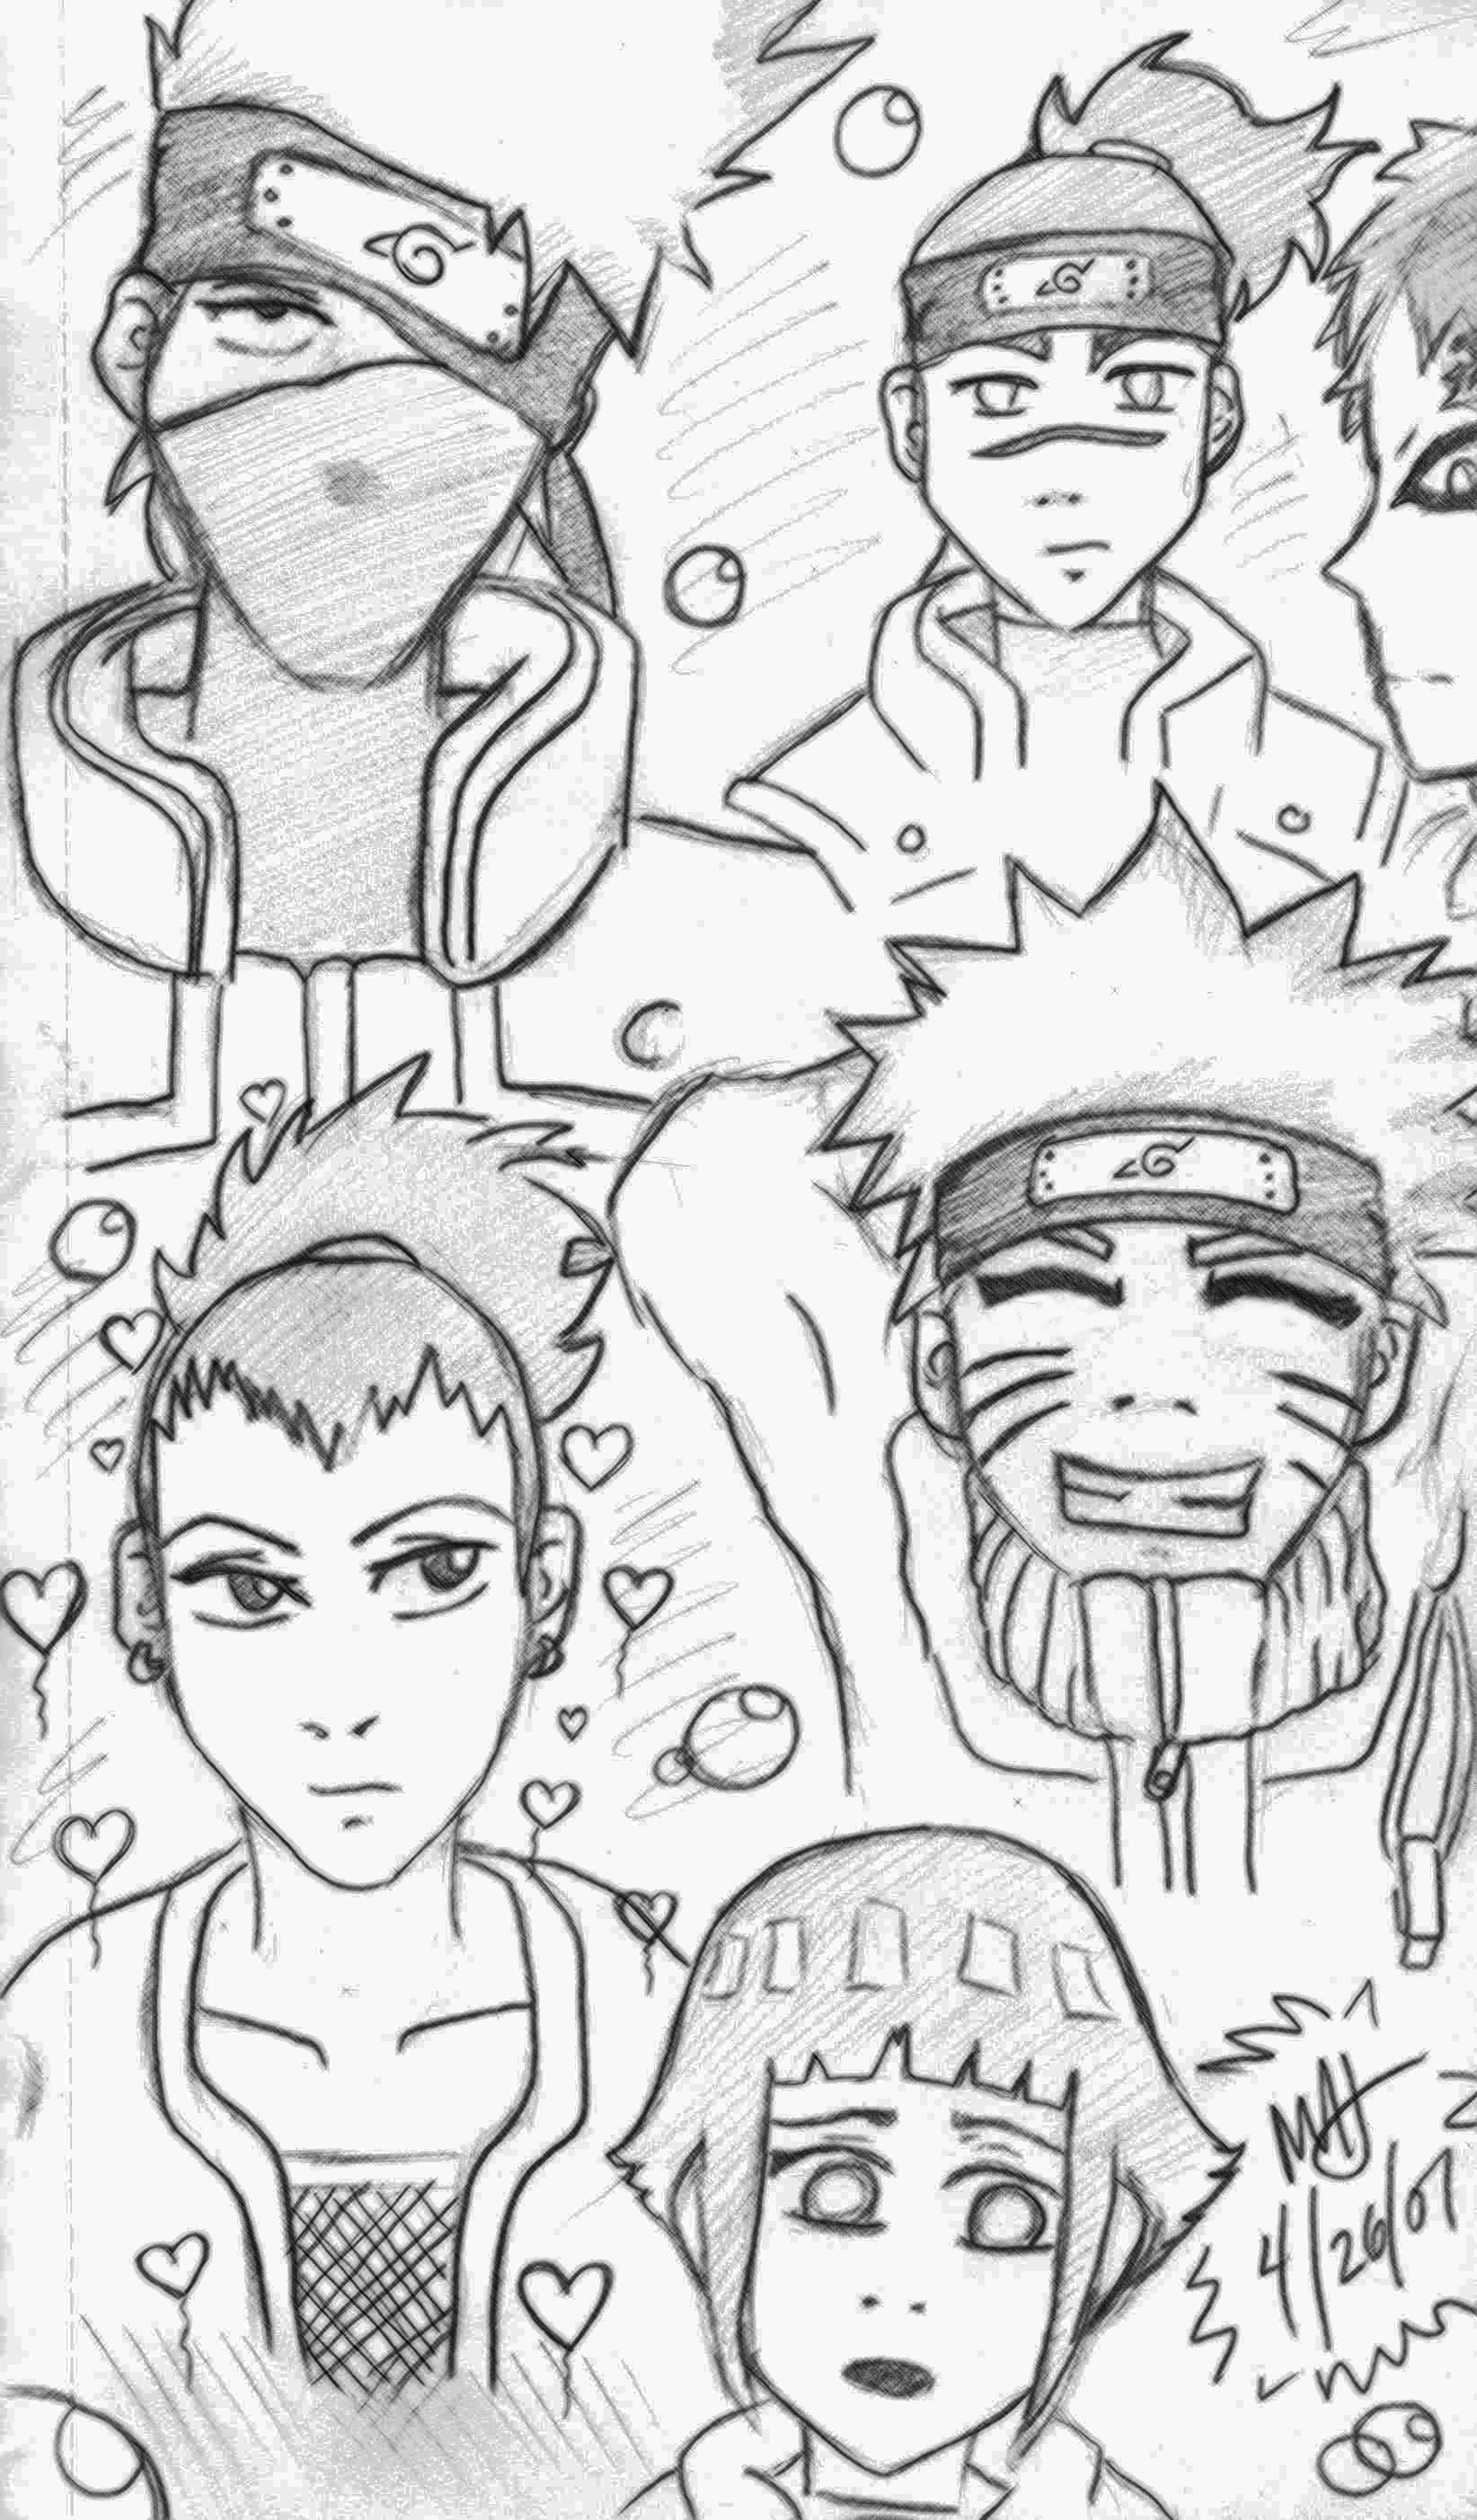 Some of my fav Naruto characters by mabwyann2